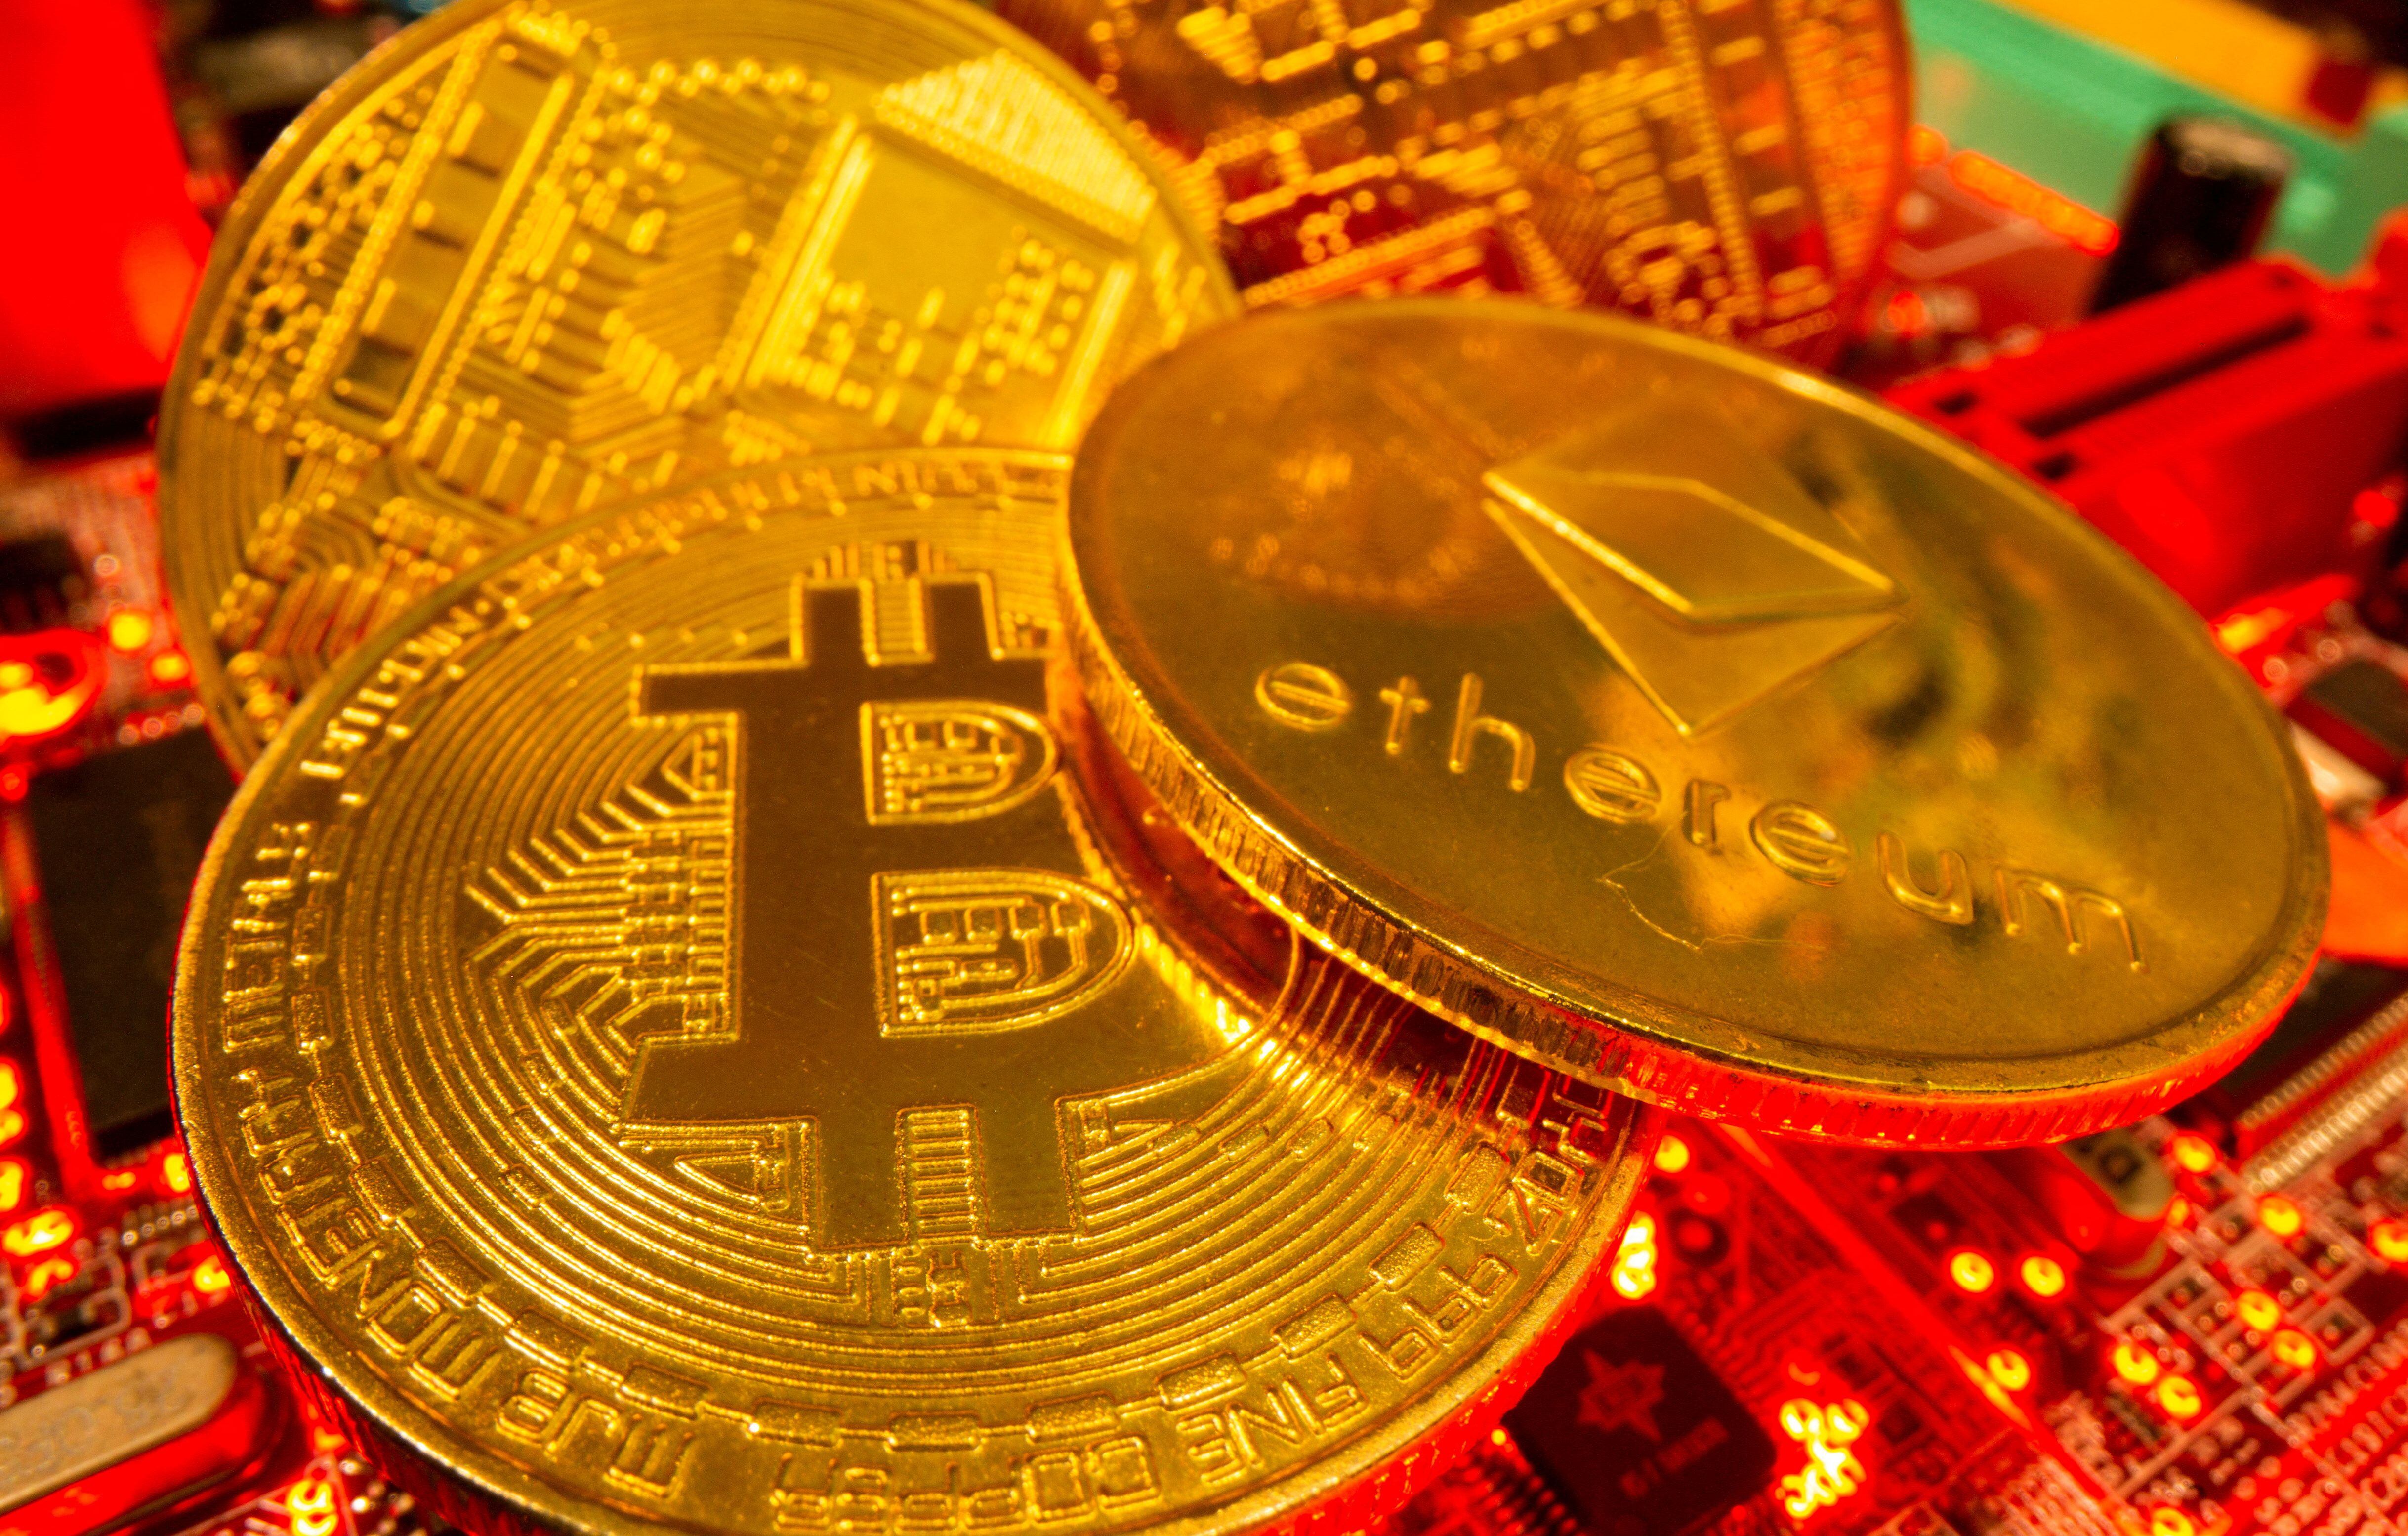 FILE PHOTO: Representations of the virtual currency Bitcoin and Ethereum stand on a motherboard in this picture illustration taken May 20, 2021. REUTERS/Dado Ruvic/Illustration/File Photo